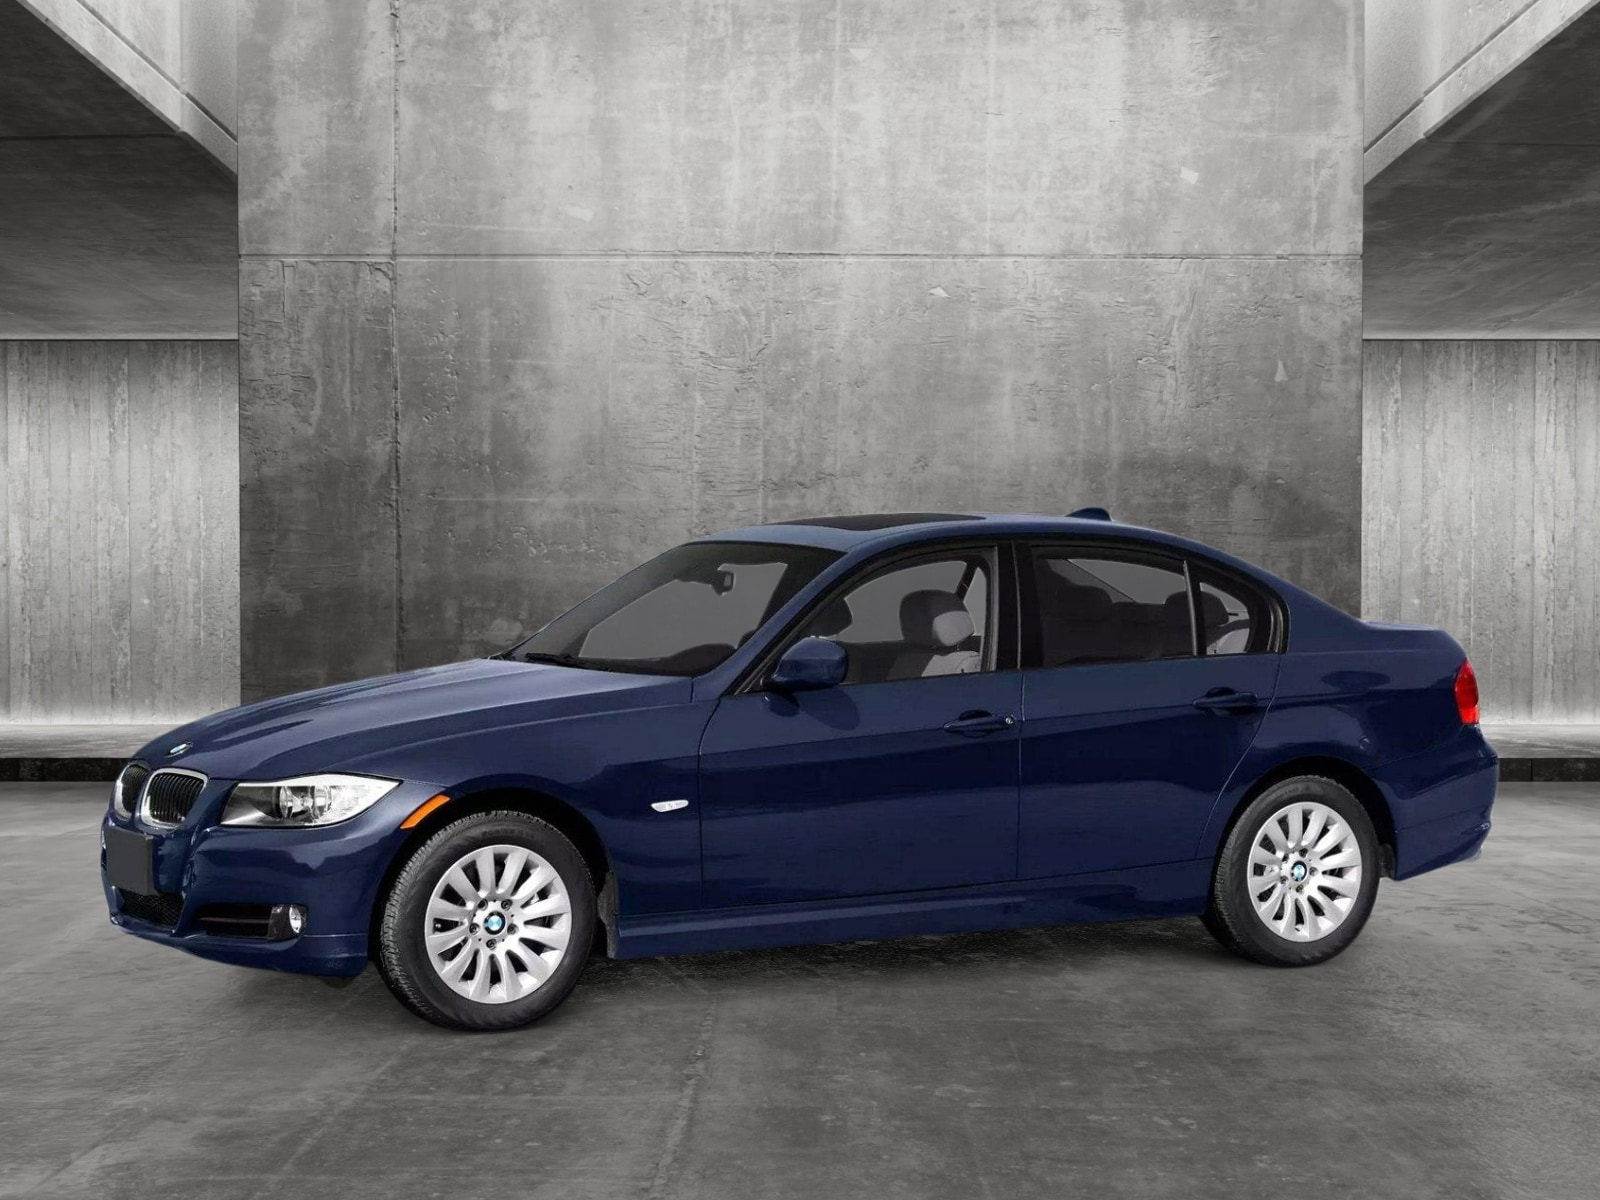 Used 2011 BMW 3 Series 328i with VIN WBAPK5C51BF123557 for sale in Centennial, CO